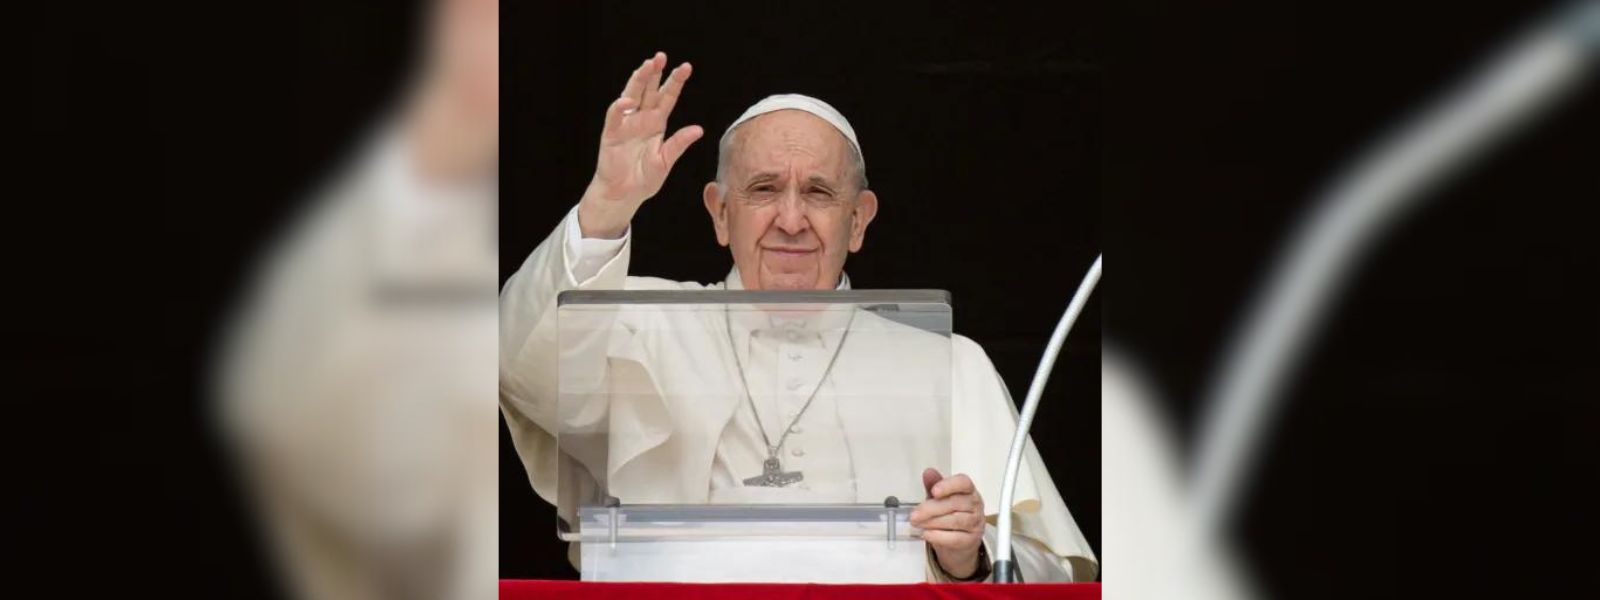 Vatican engaging in a peace mission - Pope